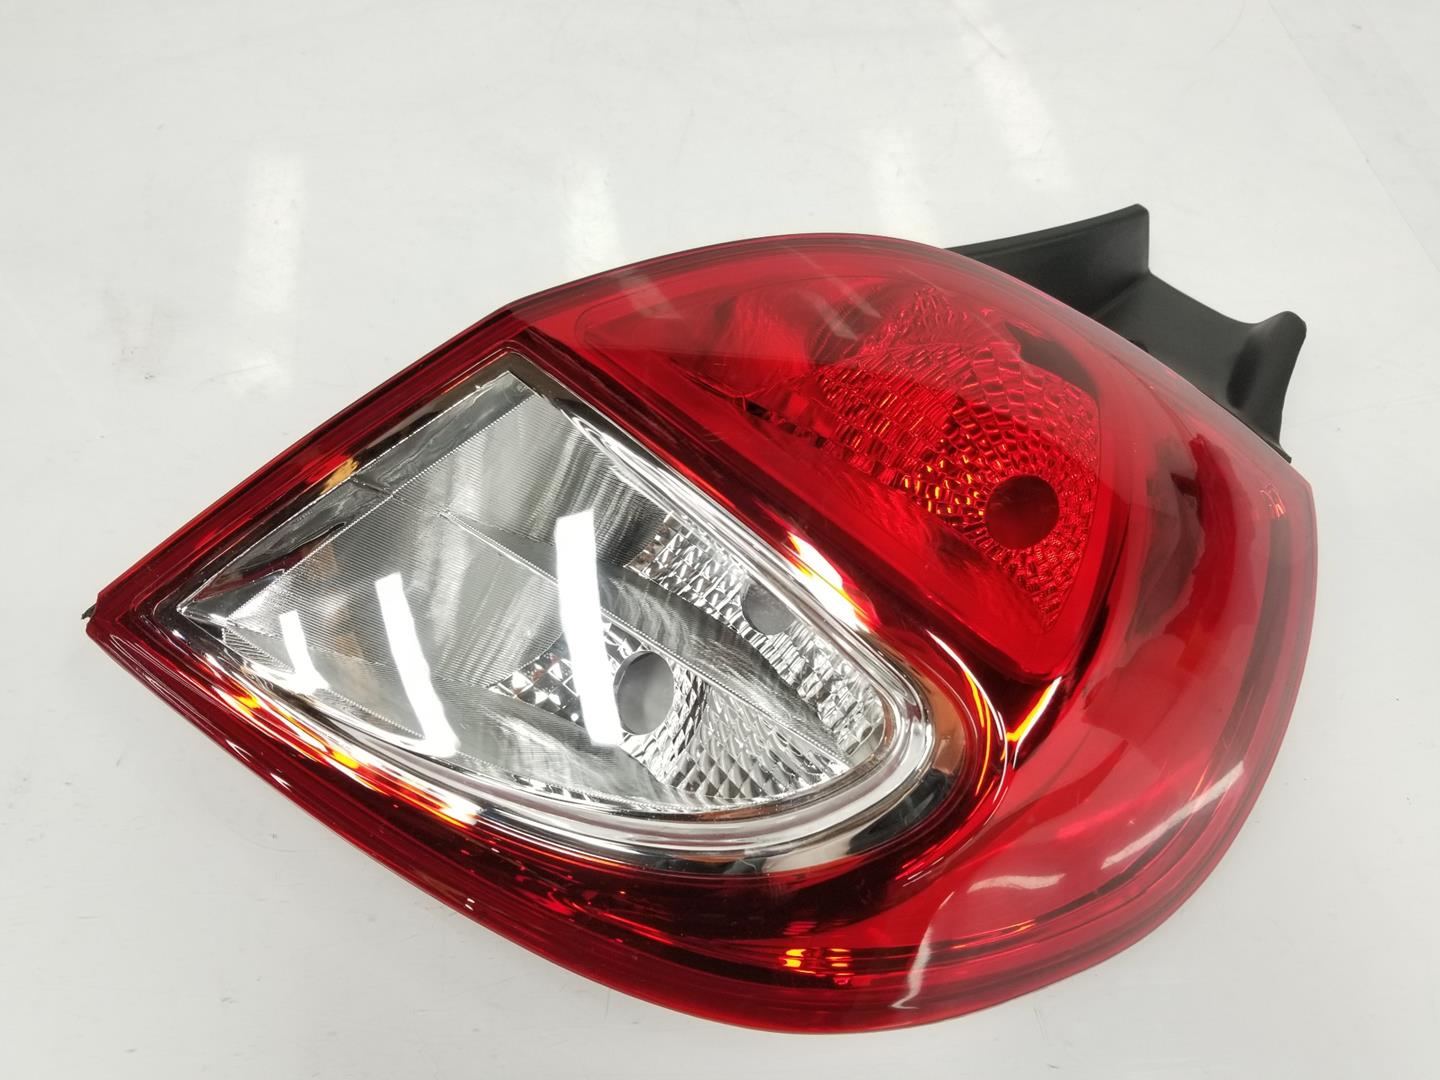 RENAULT Clio 2 generation (1998-2013) Rear Right Taillight Lamp 8200886946, DEPO085511991R 19934555